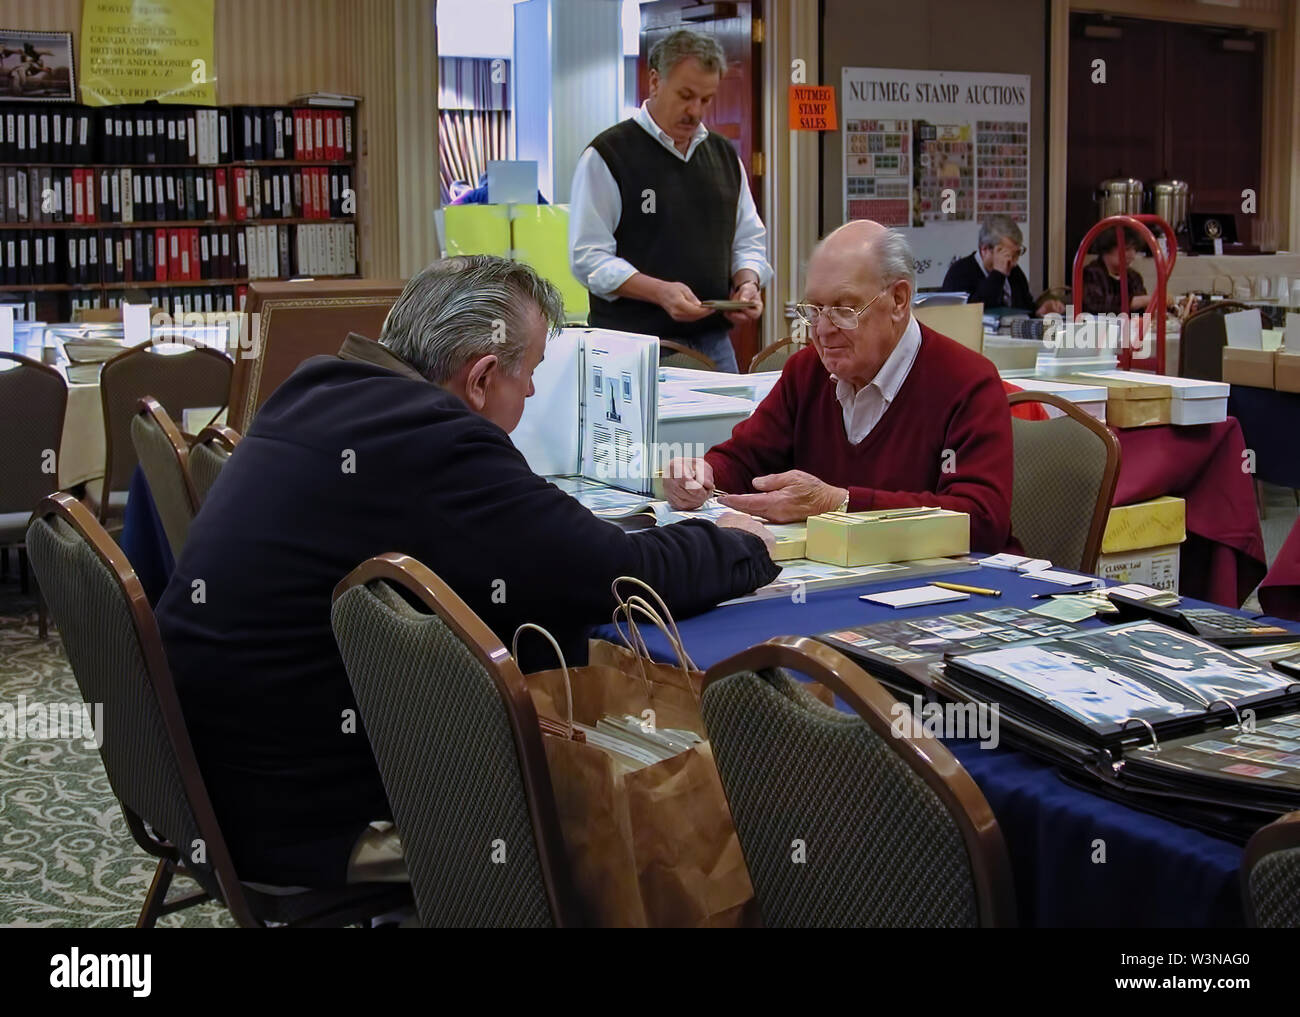 Cromwell, CT USA. Mar 2015. Two elderly men talking and dealing with each other on trades and purchases at a stamp auction event. Stock Photo